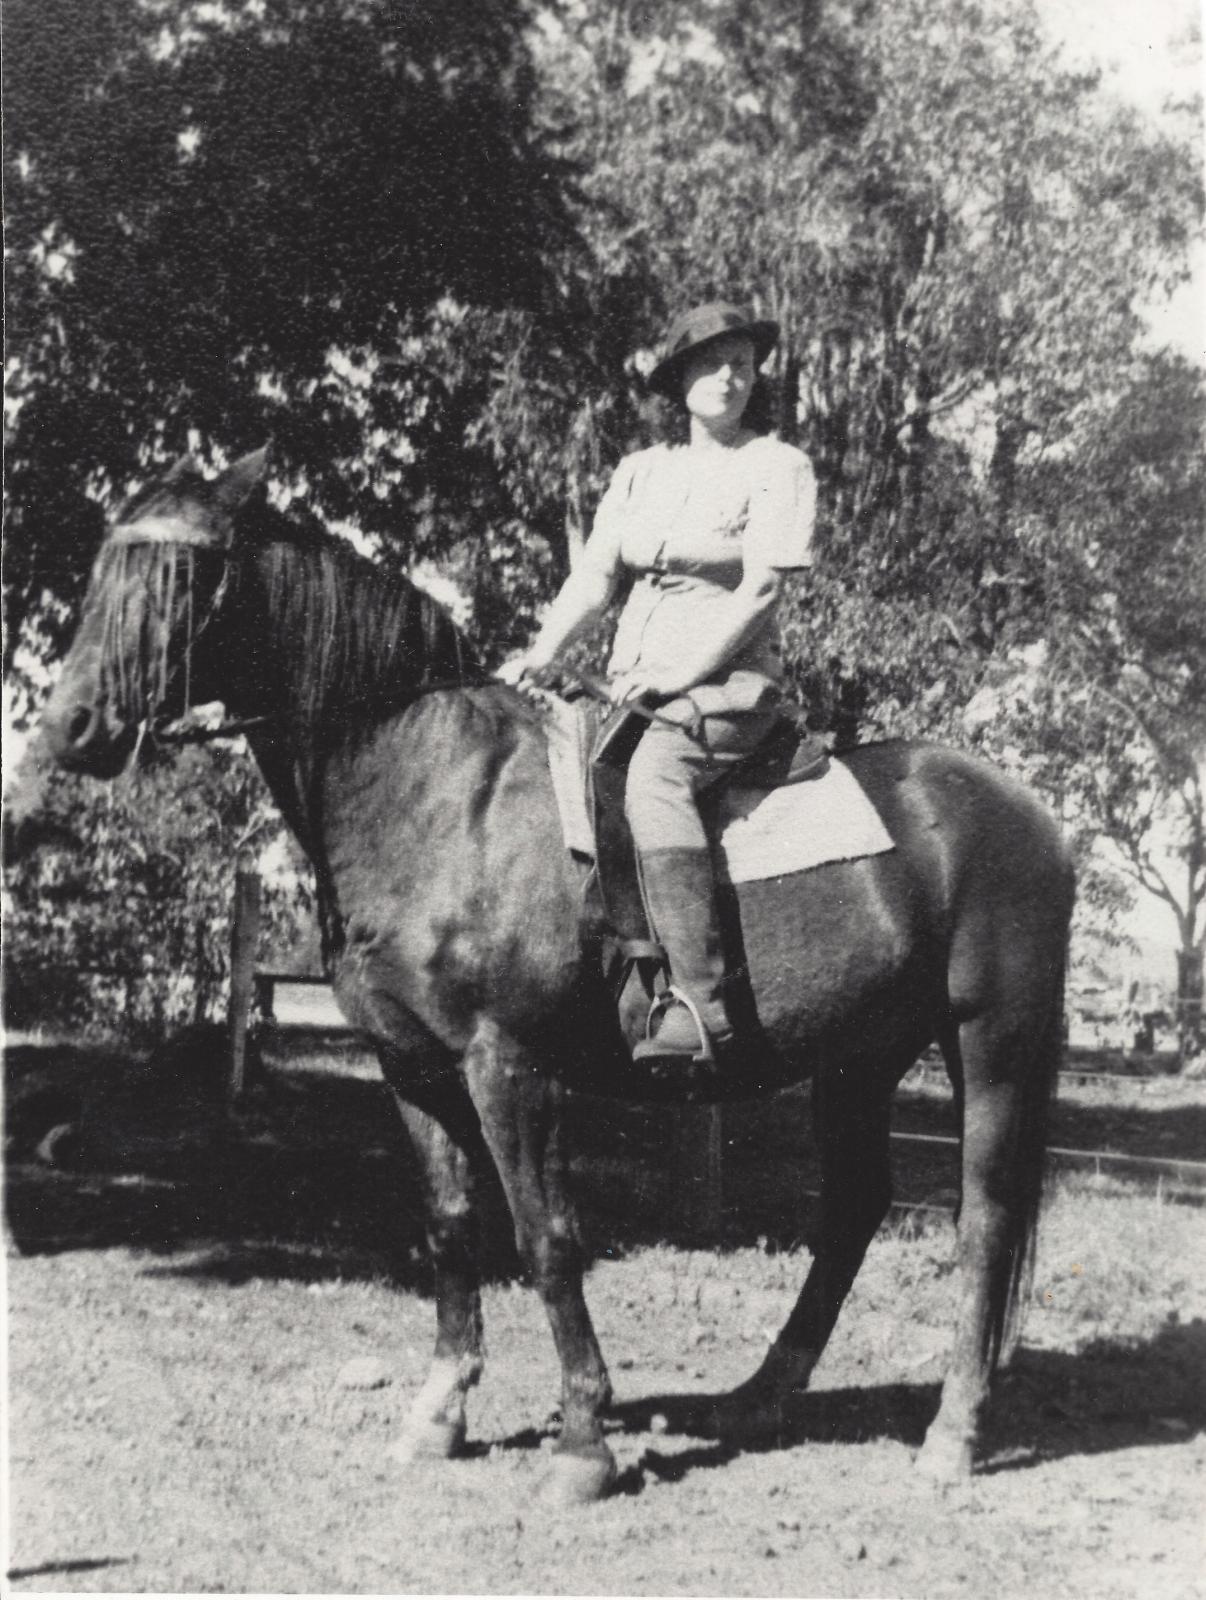 Shylie Walker on Dynamite. Shylie worked as a jillaroo at Mussel Pool for Lew Whiteman during the Second World War. This photograph was taken around 1945 and the horse Dynamite was owned by Lew Whiteman.